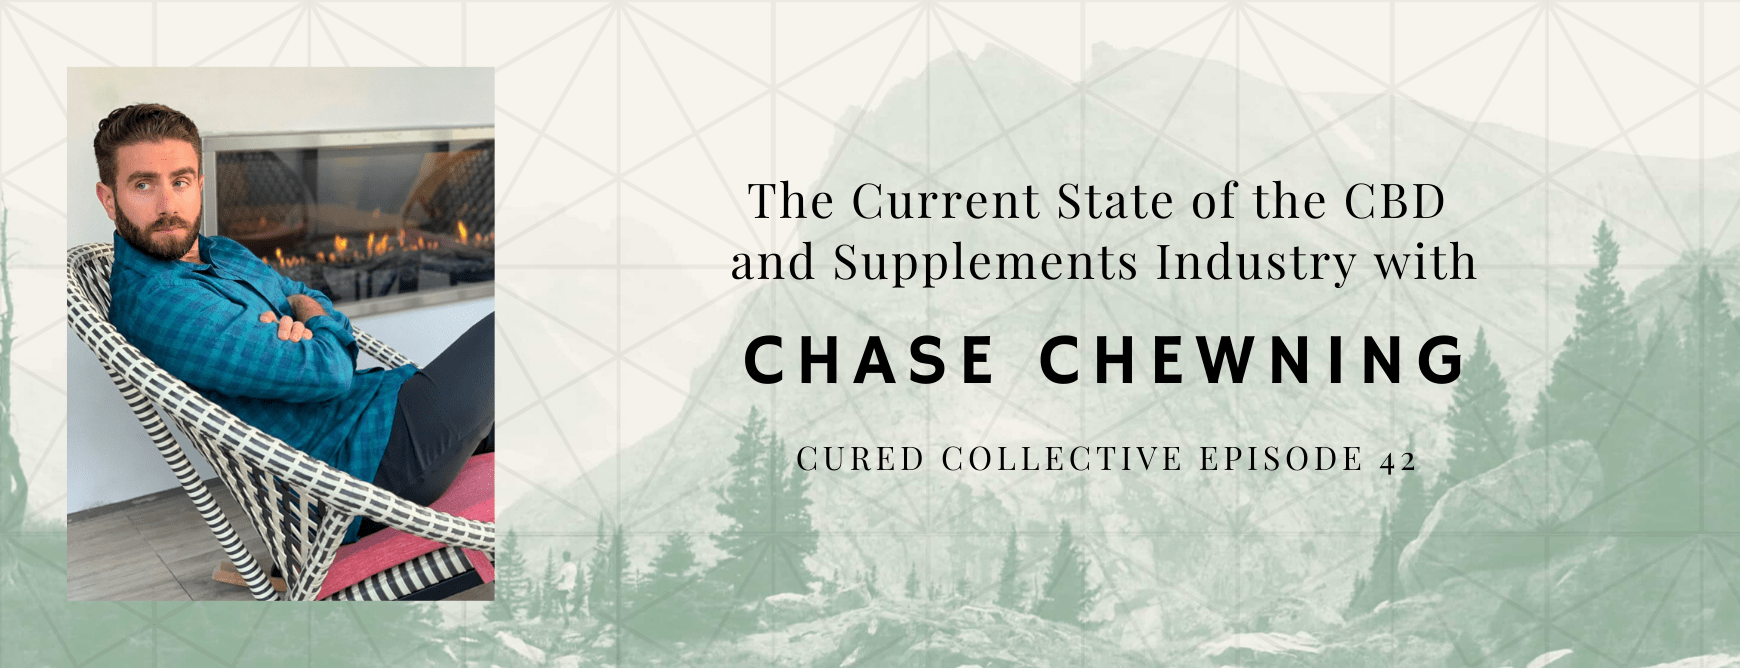 Cured Collective CBD Podcast with Chase Chewning